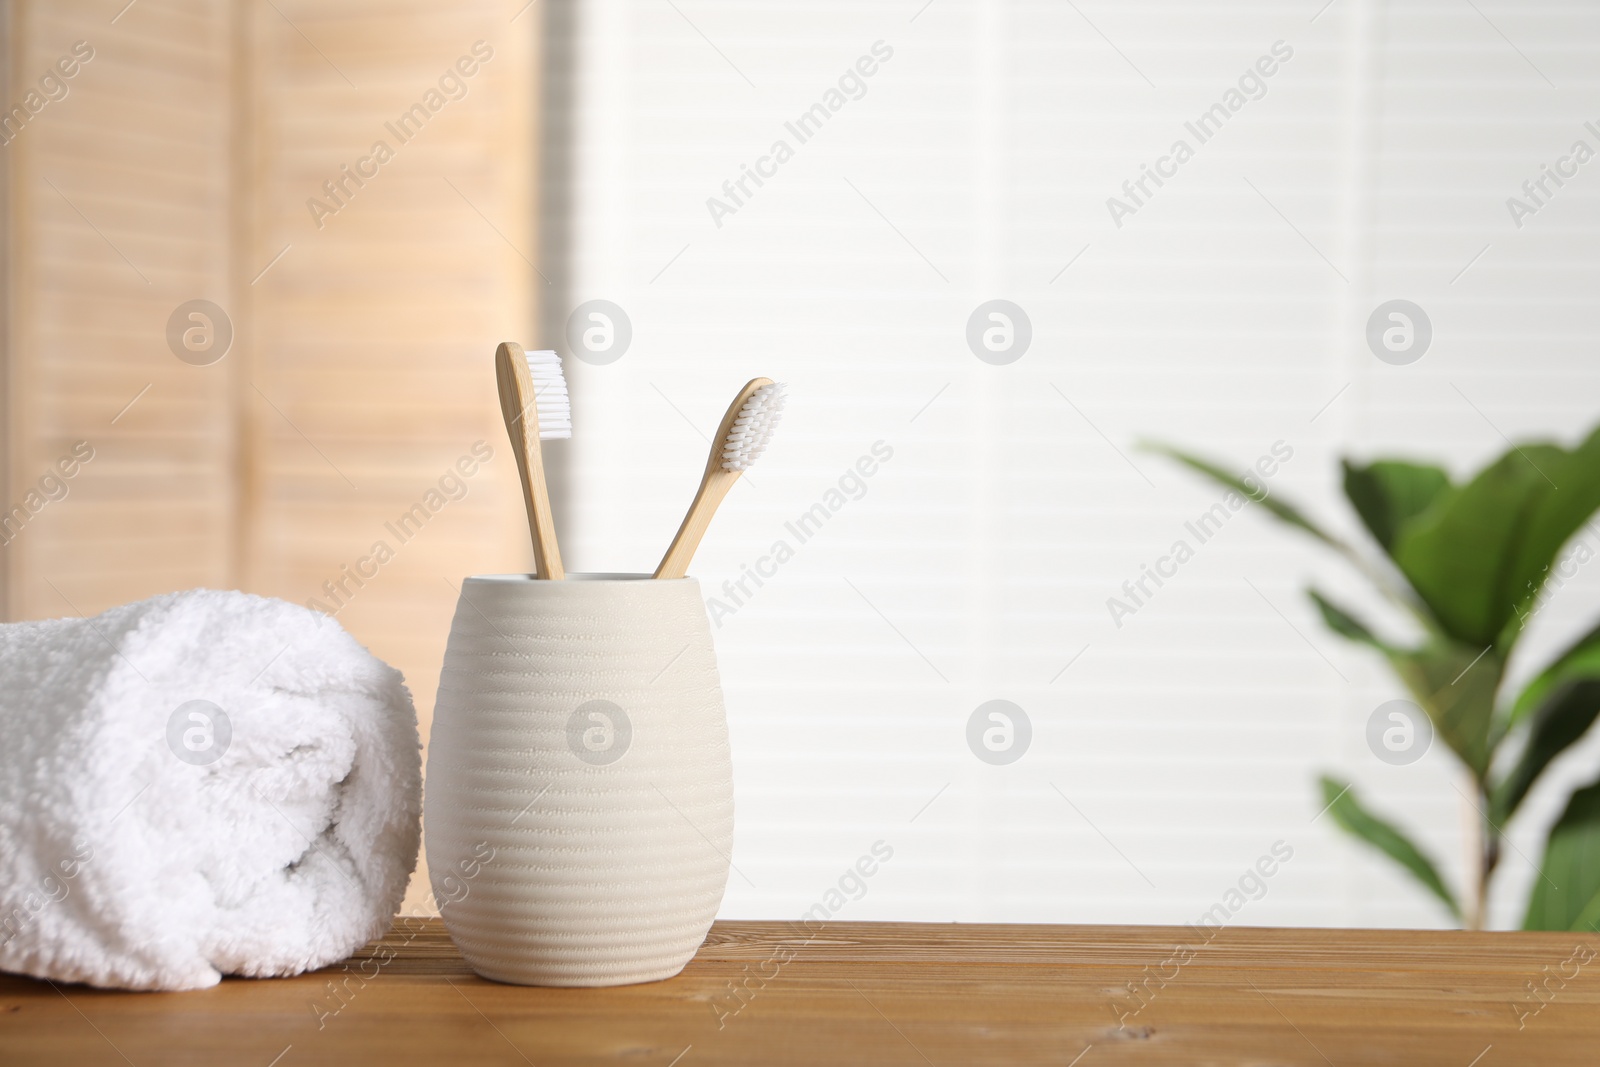 Photo of Holder with bamboo toothbrushes and towel on wooden table in bathroom, space for text